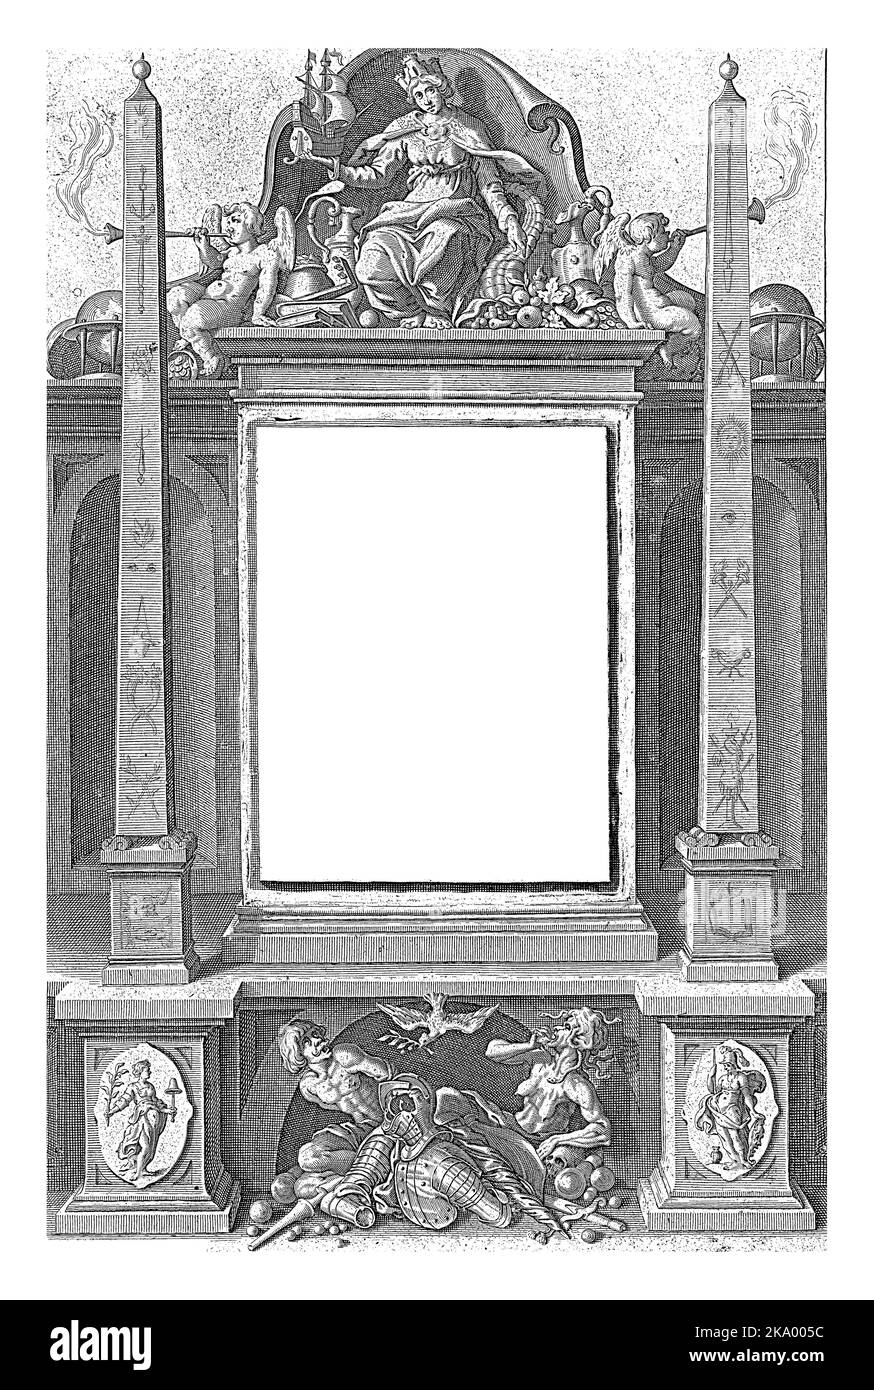 Allegory of the History of the Netherlands, Willem Jacobsz. Delff, 1623 On pedestal with title enthroned personification of the Southern Netherlands, Stock Photo